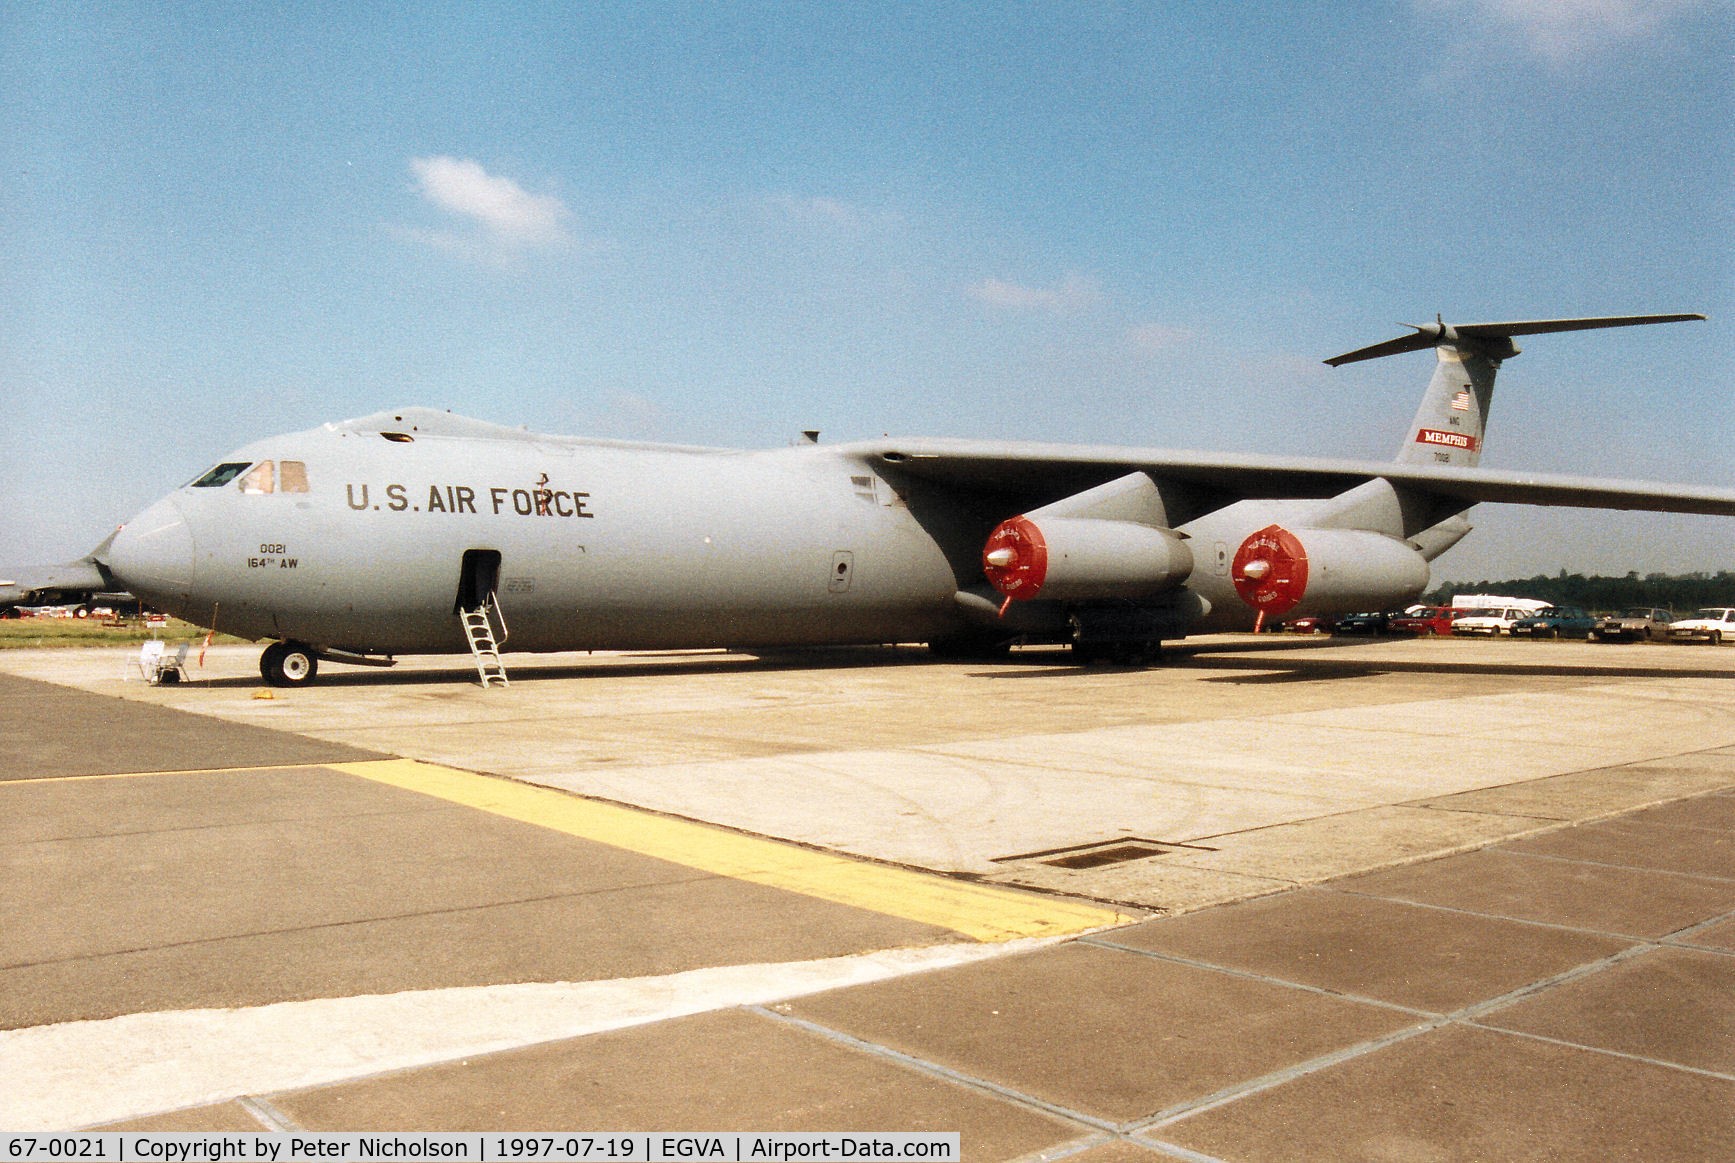 67-0021, 1967 Lockheed C-141B Starlifter C/N 300-6272, C-141B Starlifter of 155th Airlift Squadron Tennessee Air National Guard on display at the 1997 Intnl Air Tattoo at RAF Fairford.